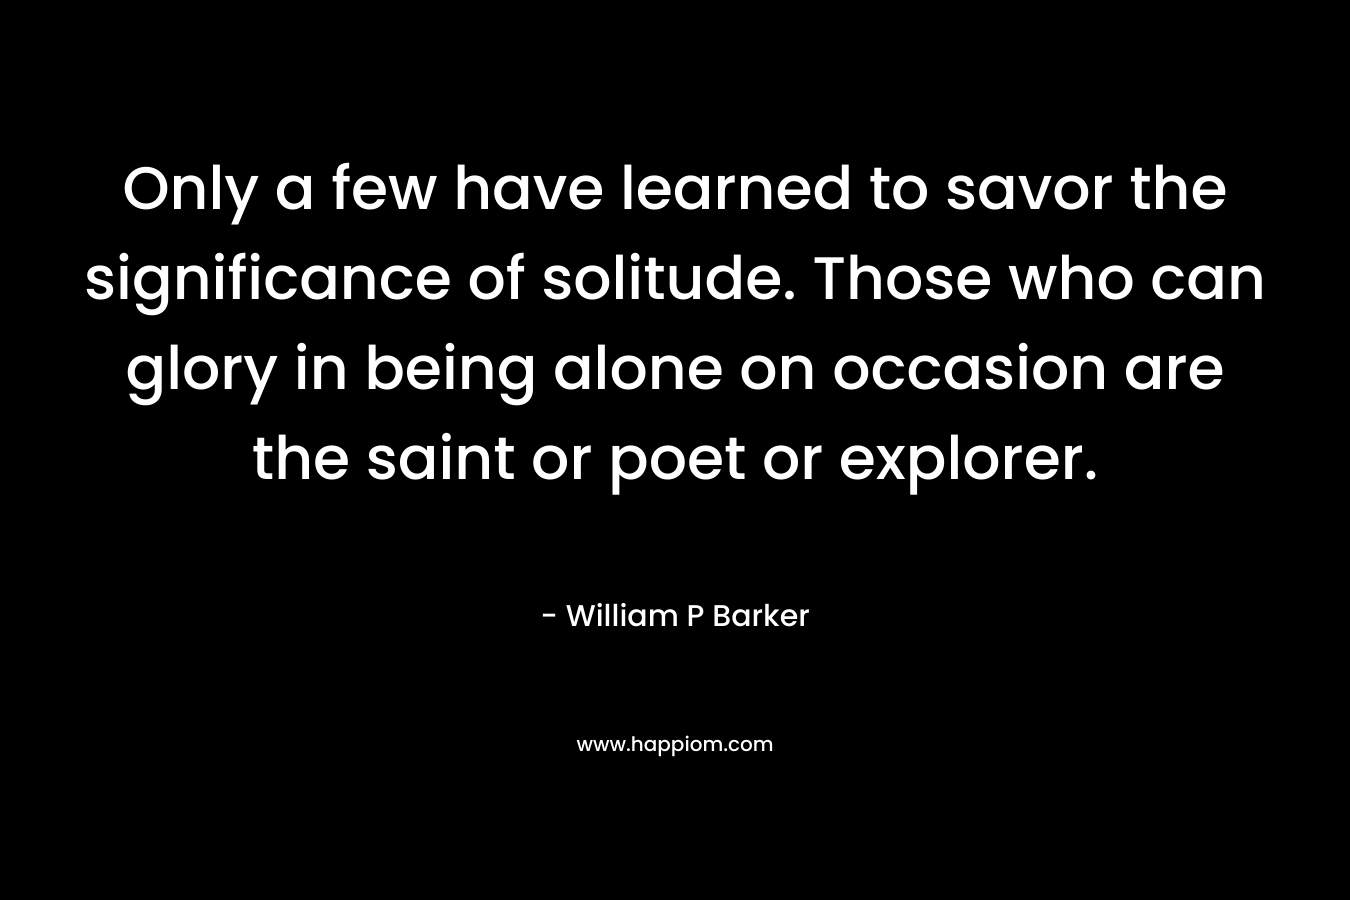 Only a few have learned to savor the significance of solitude. Those who can glory in being alone on occasion are the saint or poet or explorer. – William P Barker